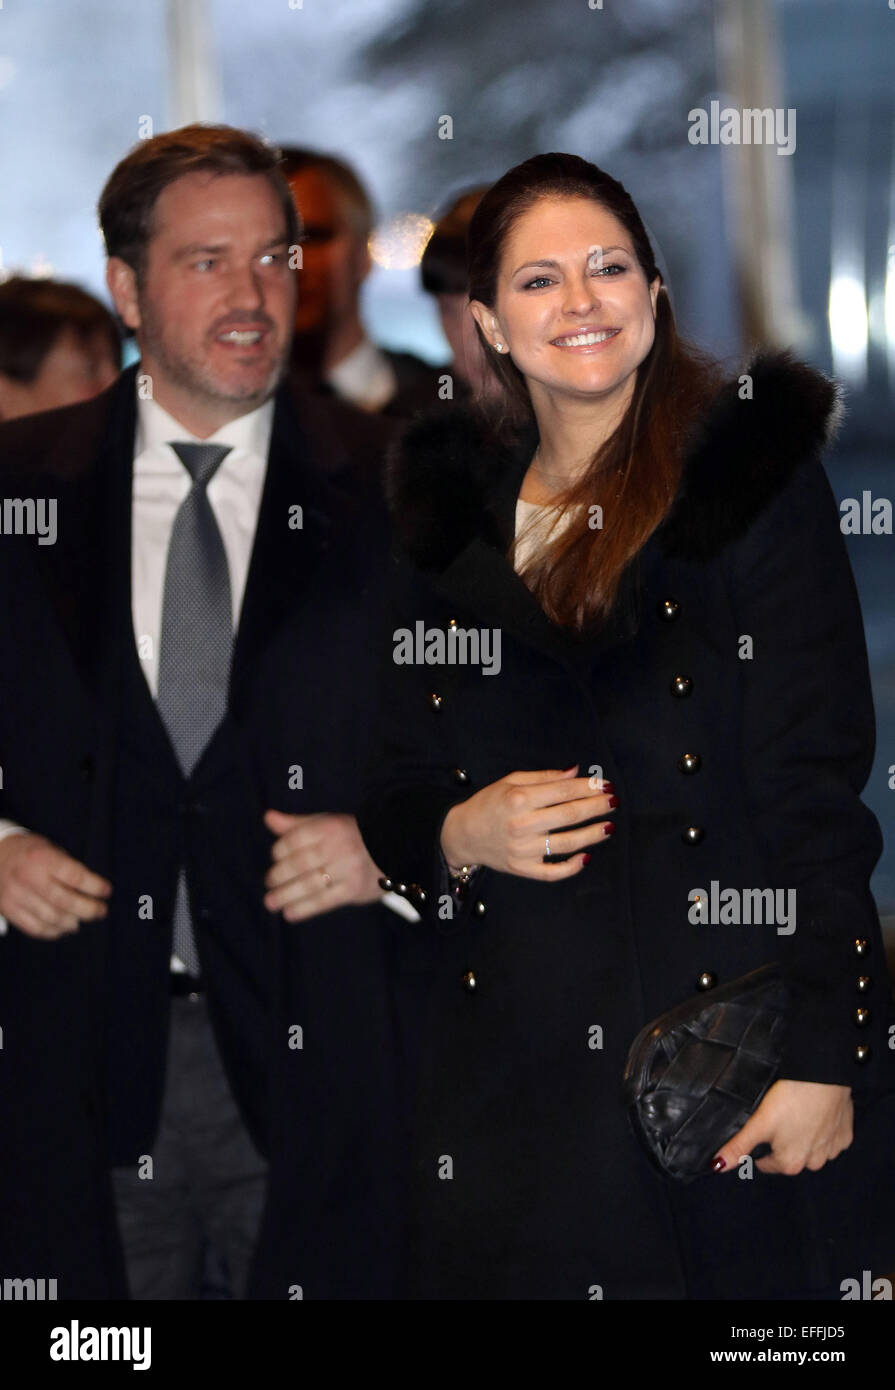 Gaevle, Sweden. 02nd Feb, 2015. Swedish pregnant Princess Madeleine and her husband Christopher O'Neill visit the youth center Helges in Gaevle, Sweden, 02 February 2015. Photo: Albert Nieboer/ RPE/ - NO WIRE SERVICE -/dpa/Alamy Live News Stock Photo